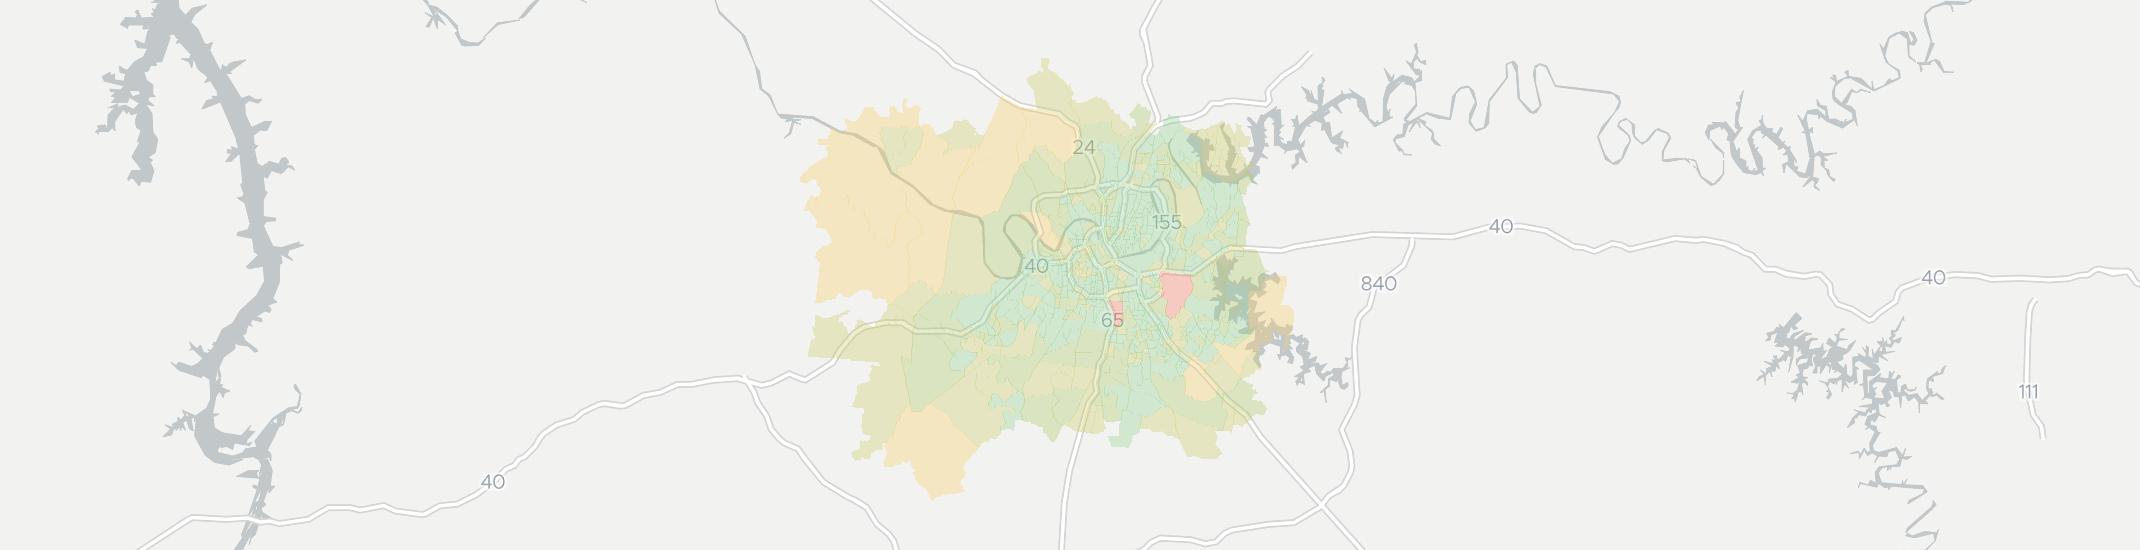 Nashville Internet Competition Map. Click for interactive map.